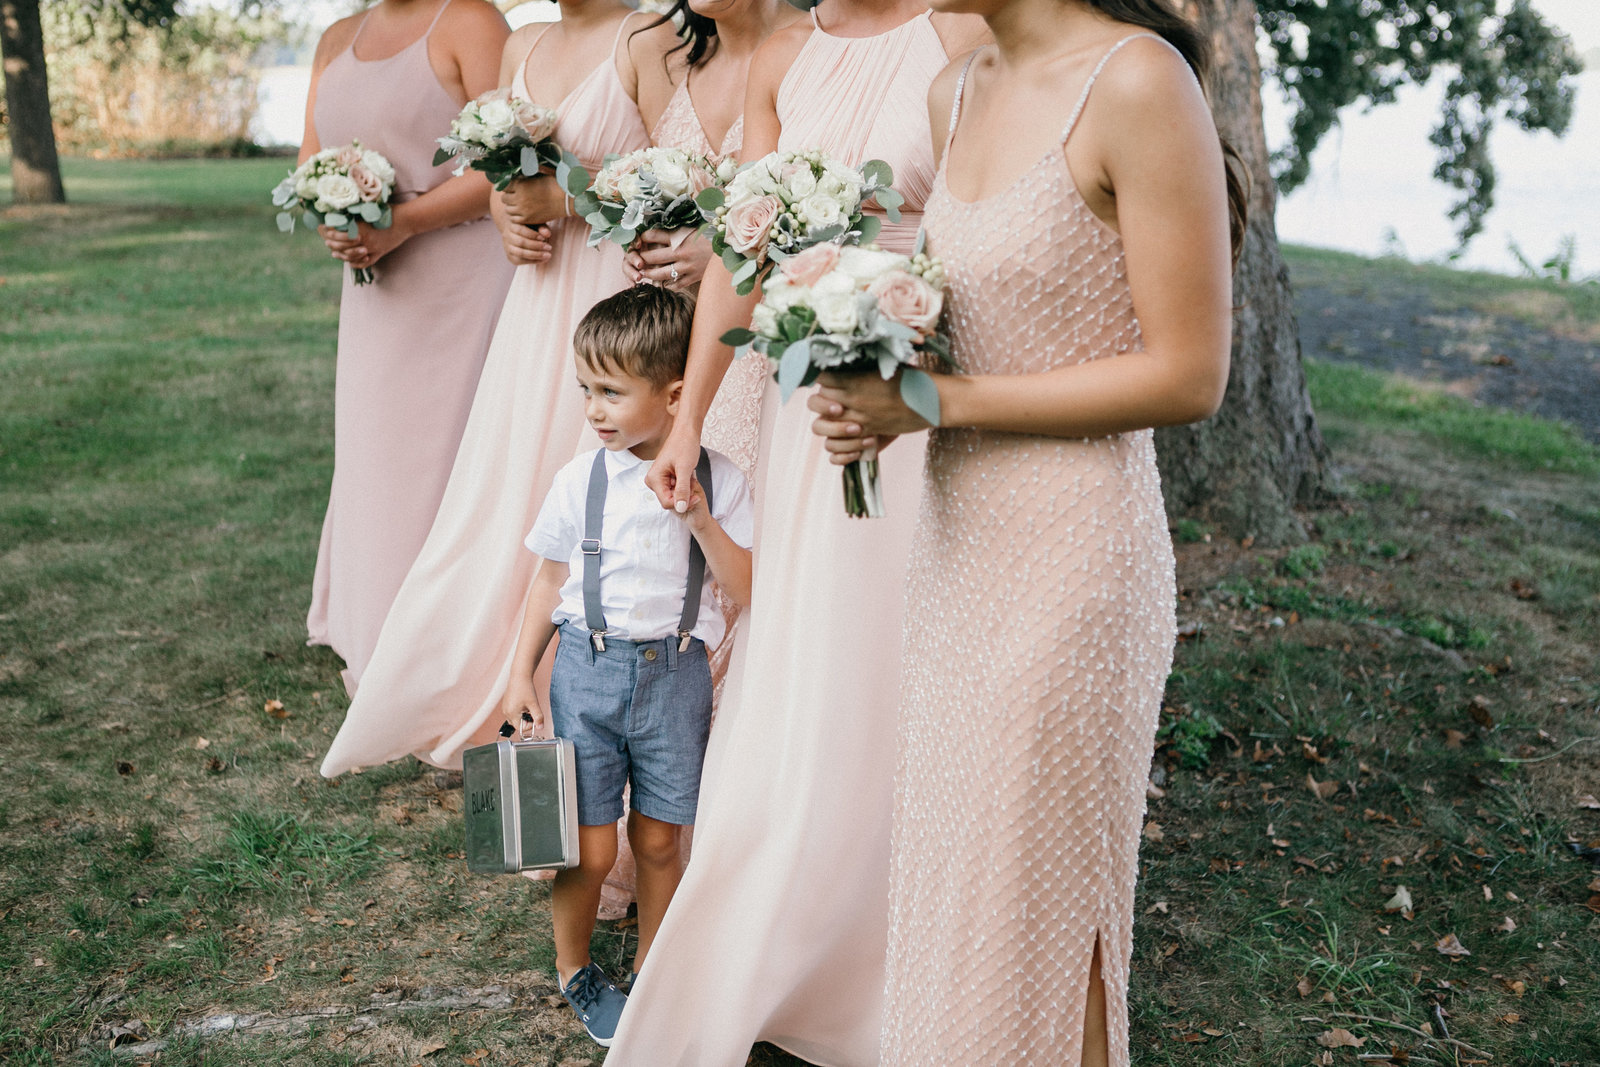 Cutest ring bearer photographed with the bridesmaids during this outdoor wedding ceremony at Glen Foerd.